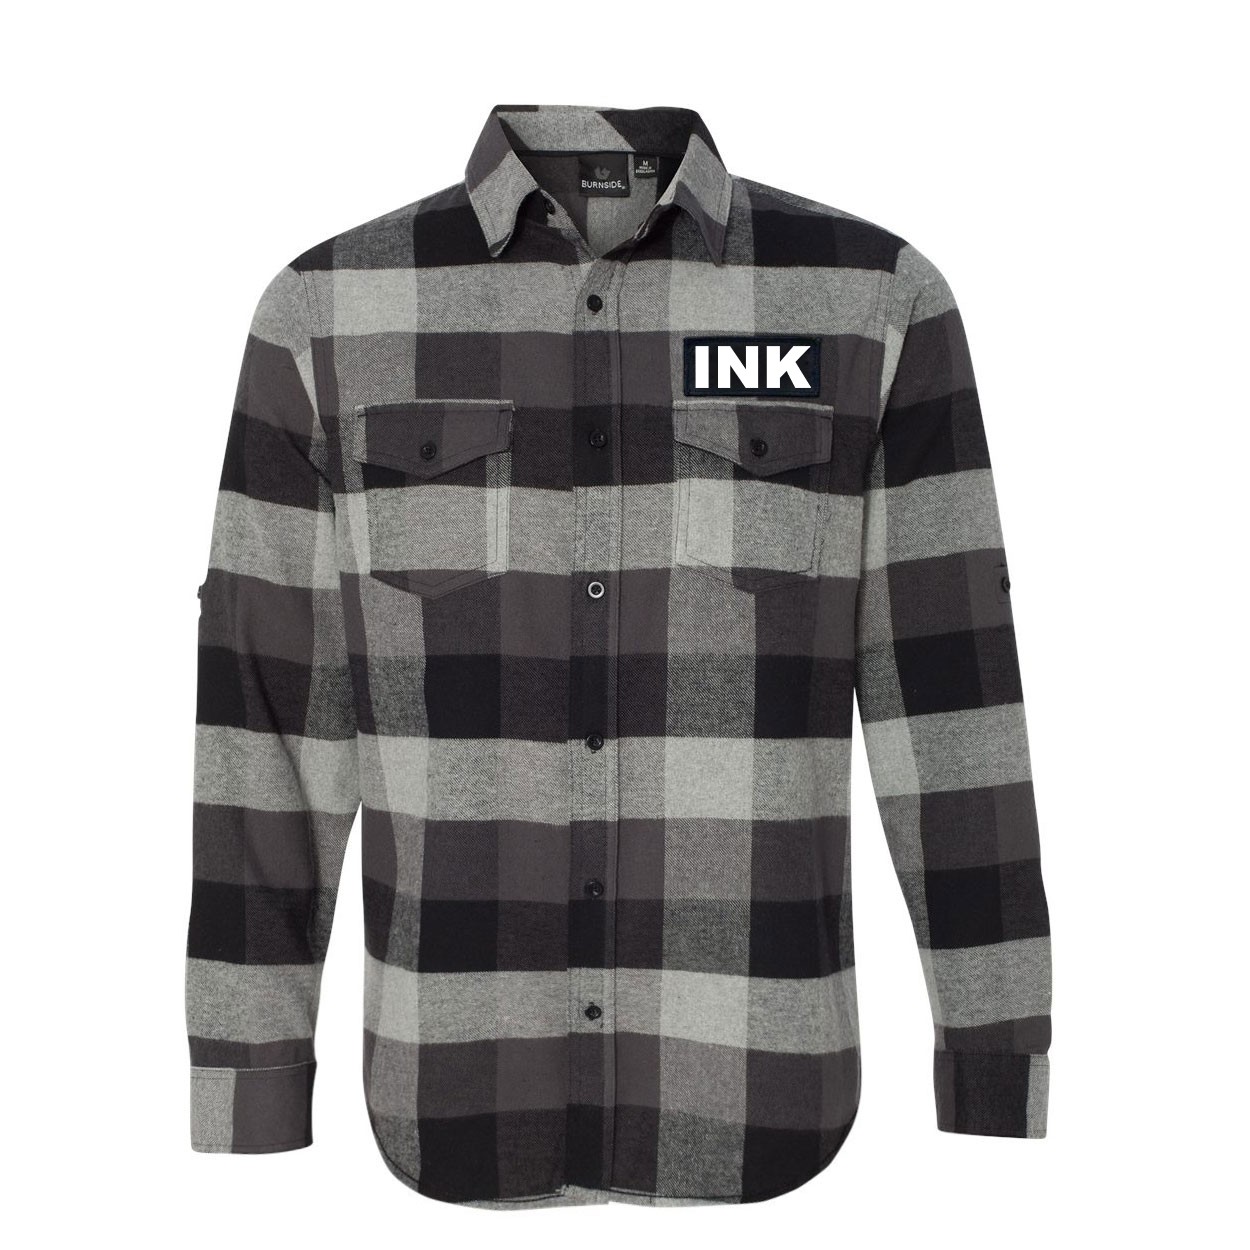 Ink Brand Logo Classic Unisex Long Sleeve Woven Patch Flannel Shirt Black/Gray (White Logo)